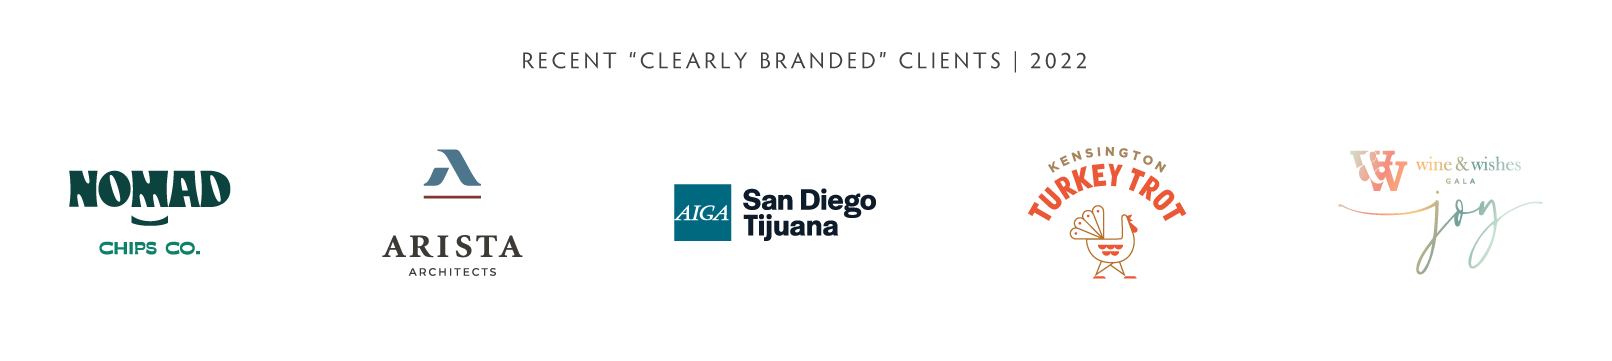 2022 "Clearly Branded" clients/brand